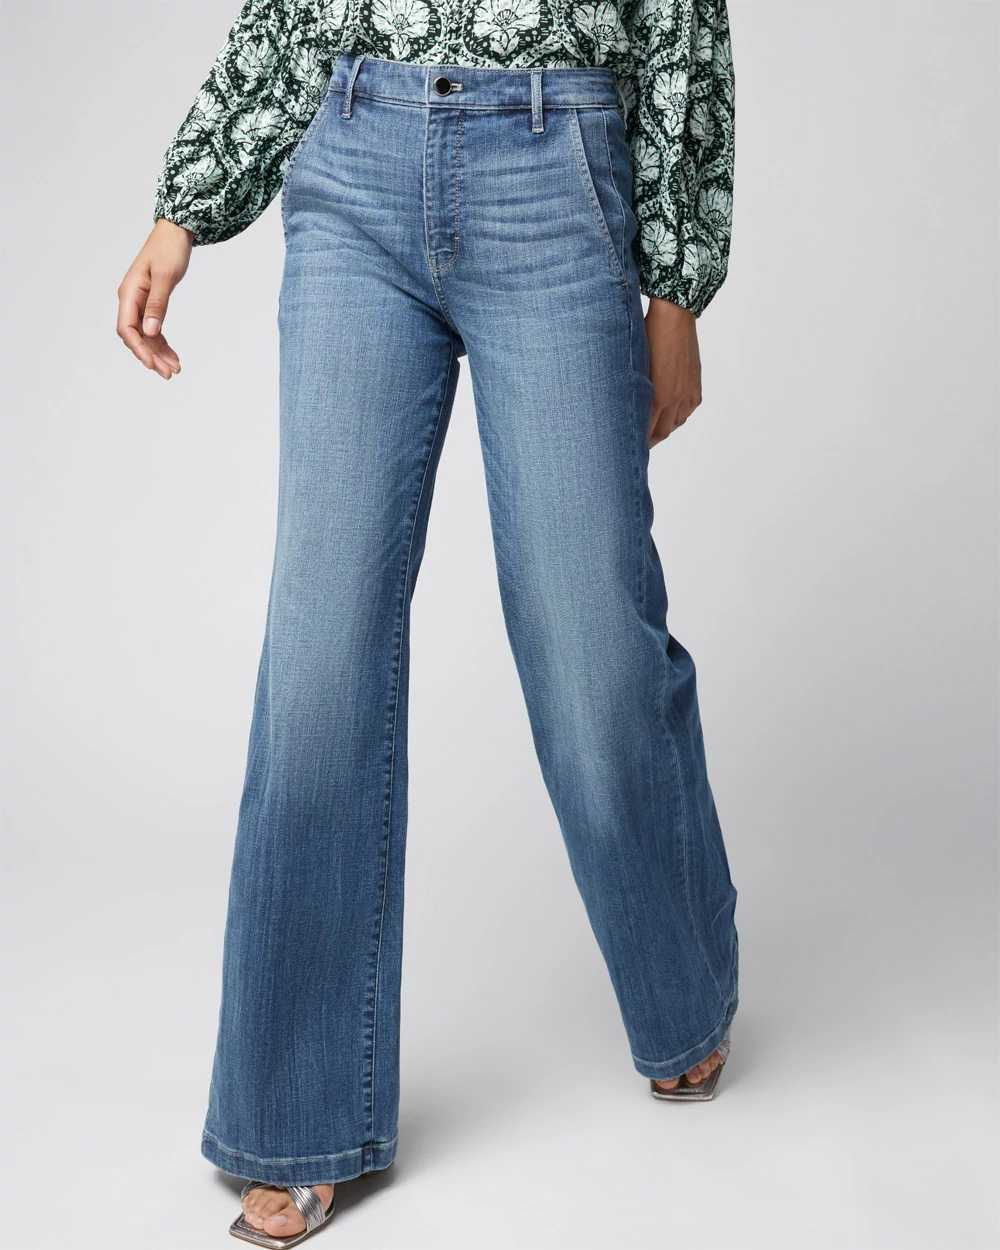 Extra High-Rise Everyday Soft Denim  Wide Leg Trouser Jeans click to view larger image.